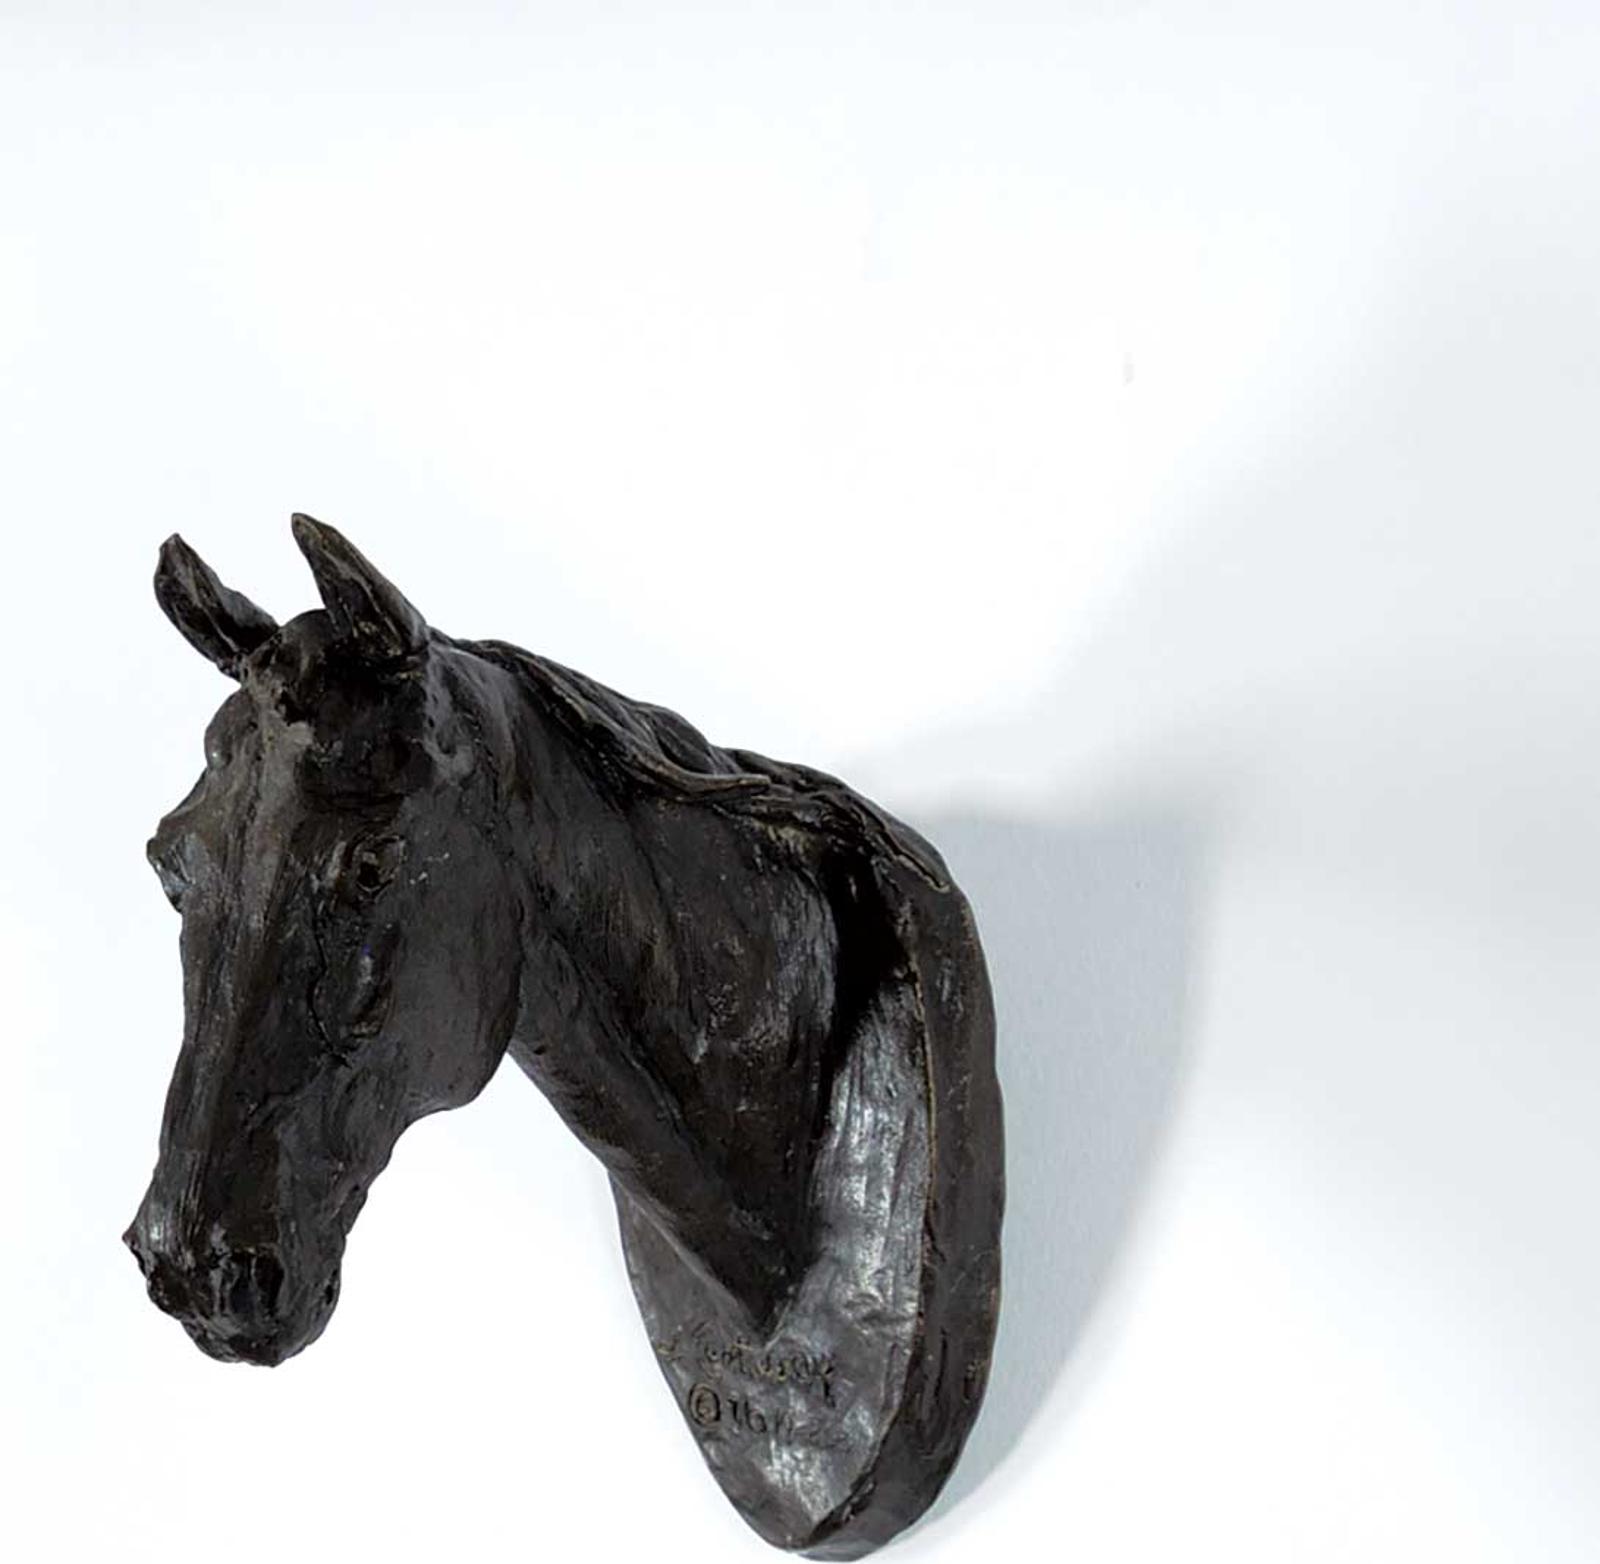 Jay Contway (1935) - Untitled - Small Mounted Horse Head  #19/200